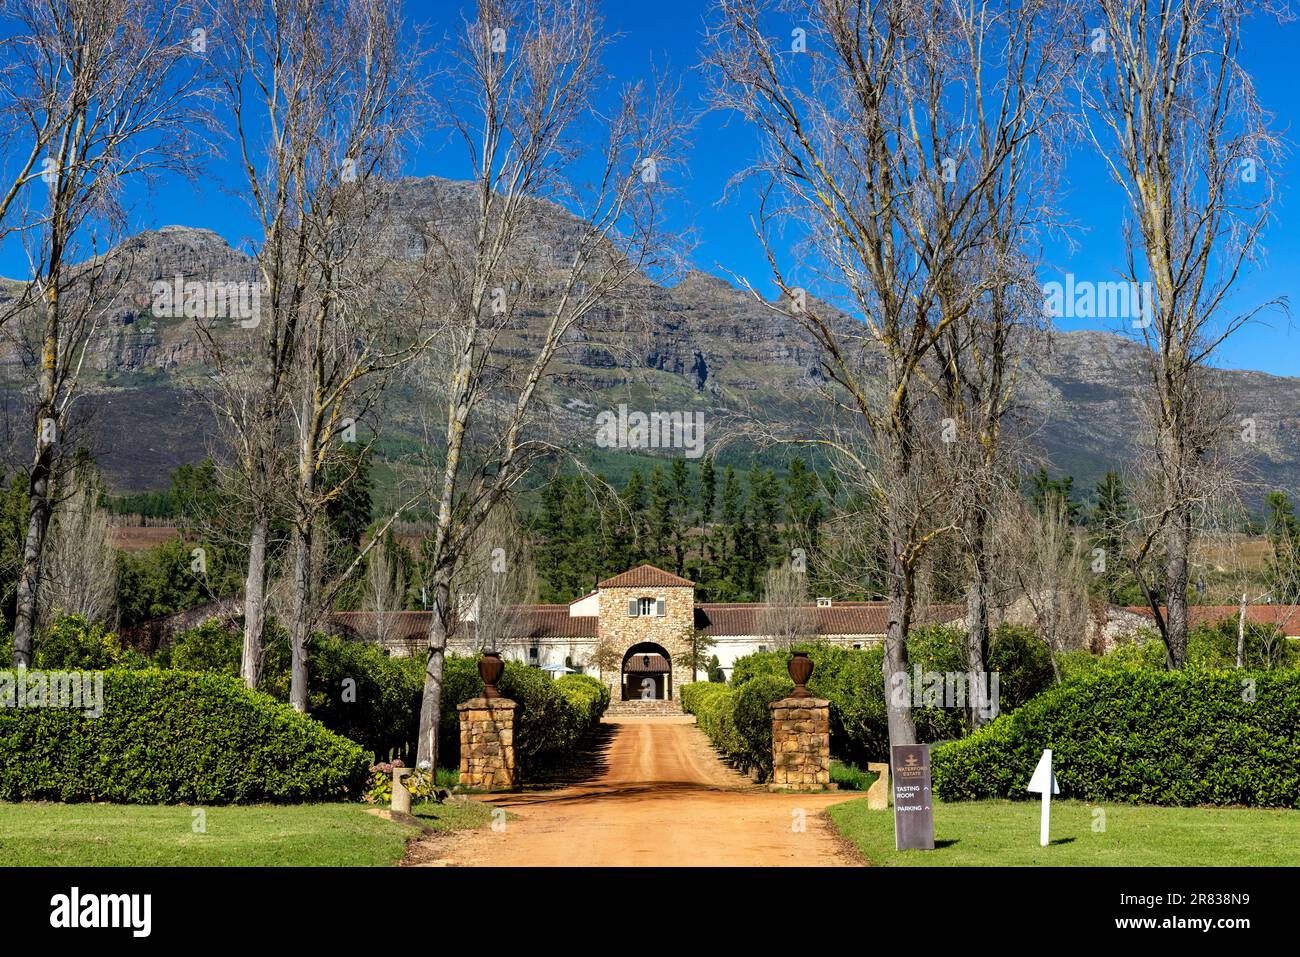 Entrance to the Waterford Estate in the Blaauwklippen Valley on the slopes of Helderberg Mountain - Stellenbosch, Winelands near Cape Town, South Afri Stock Photo